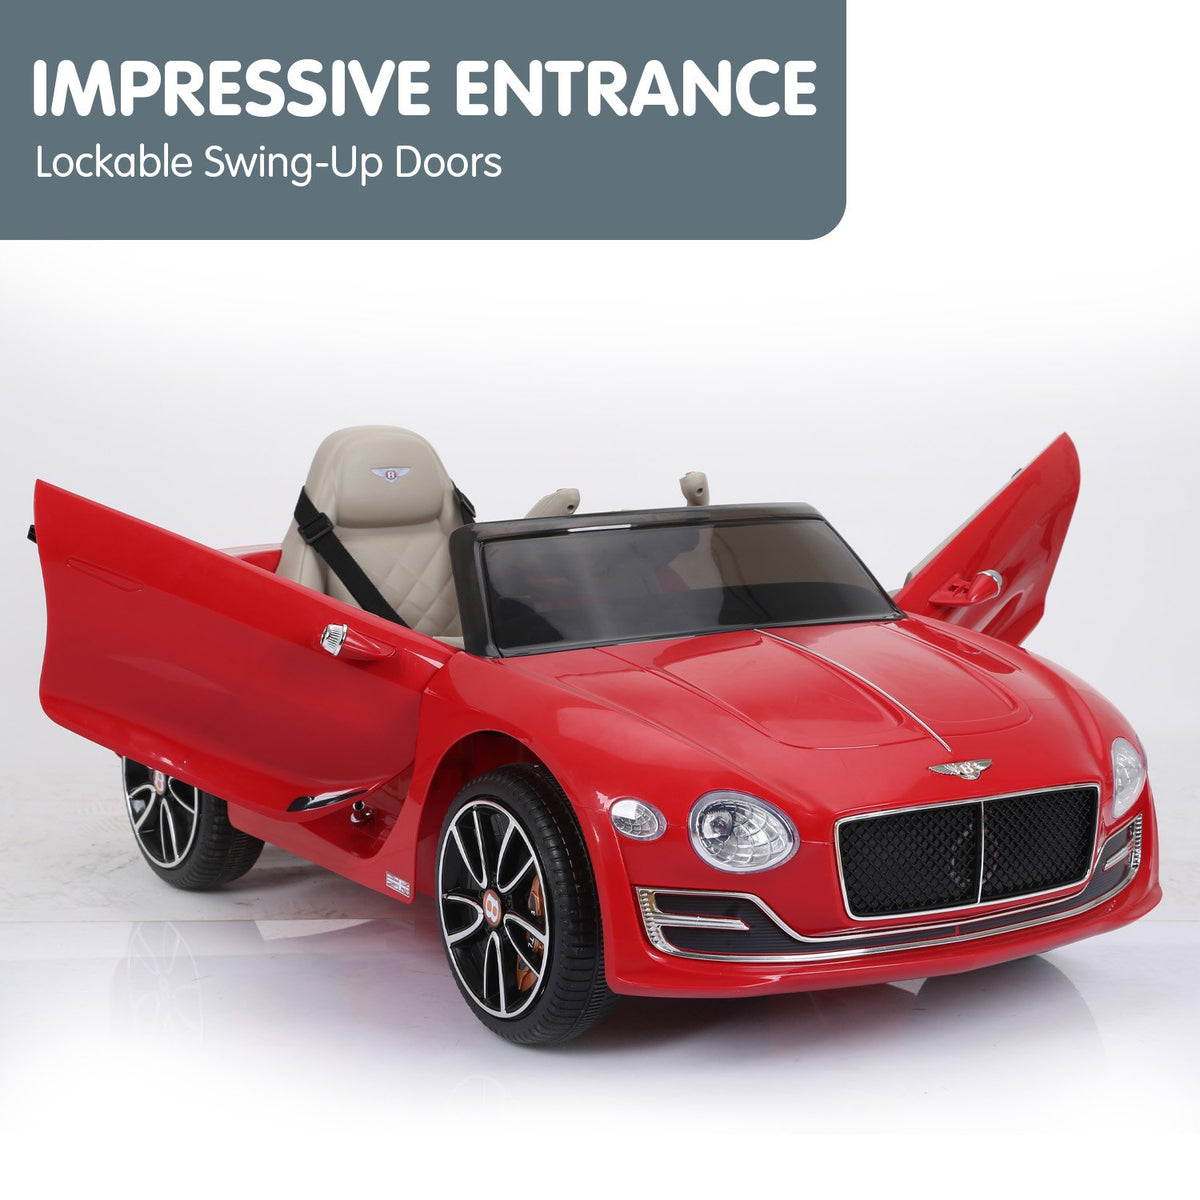 Bentley Exp 12 Speed 6E Licensed Kids Ride On Electric Car - Red